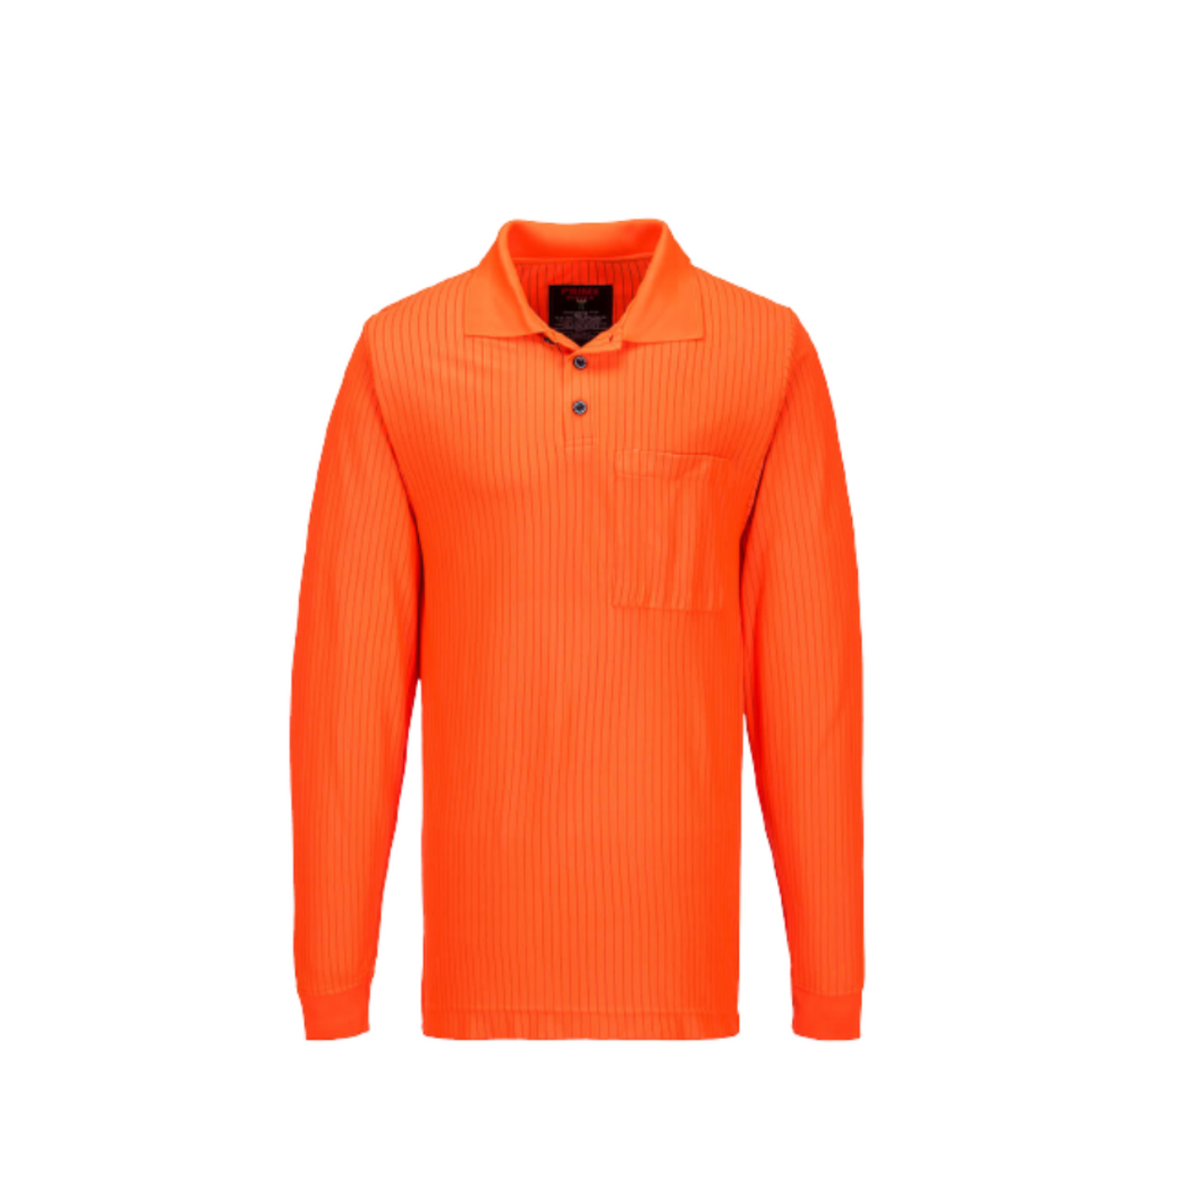 Portwest Flame Resistant Anti-Static Polo Orange Jumper Long Sleeve Shirt MF813-Collins Clothing Co